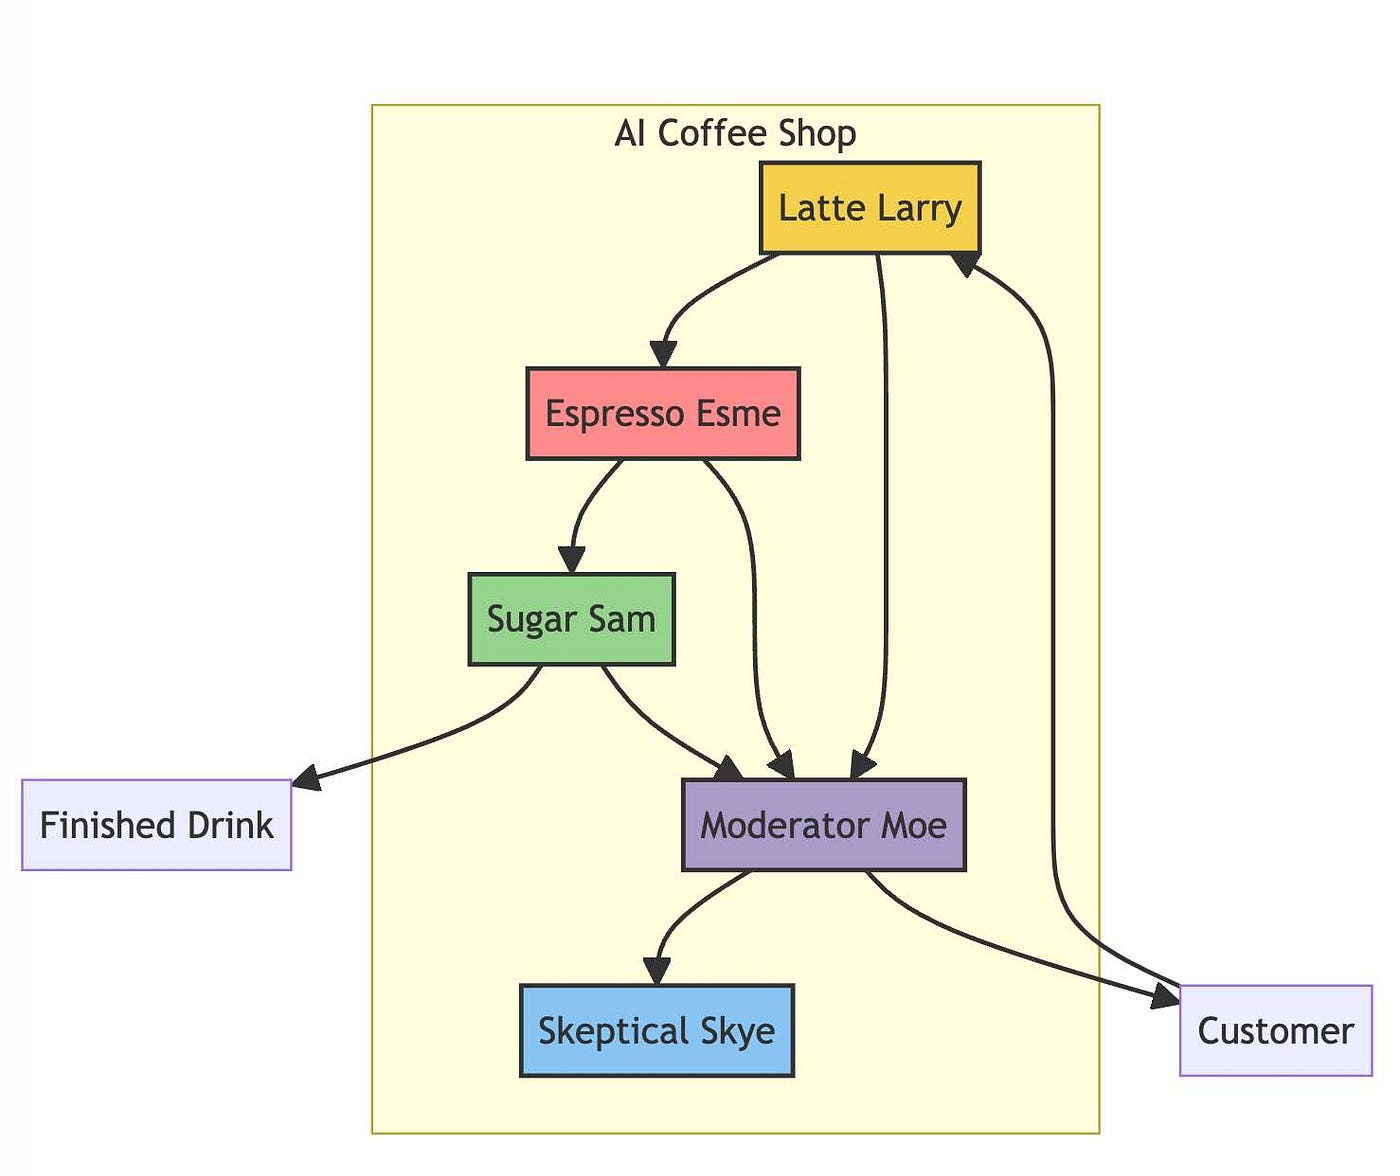 Whimsical flowchart depicting the ‘AI Coffee Shop’ scenario. The customer places an order which goes through a series of AI baristas: ‘Latte Larry’, ‘Espresso Esme’, and ‘Sugar Sam’. ‘Moderator Moe’ oversees the process, ensuring no extra sugar is added and streamlining decision-making, while ‘Skeptical Skye’ critically assesses the choices being made.